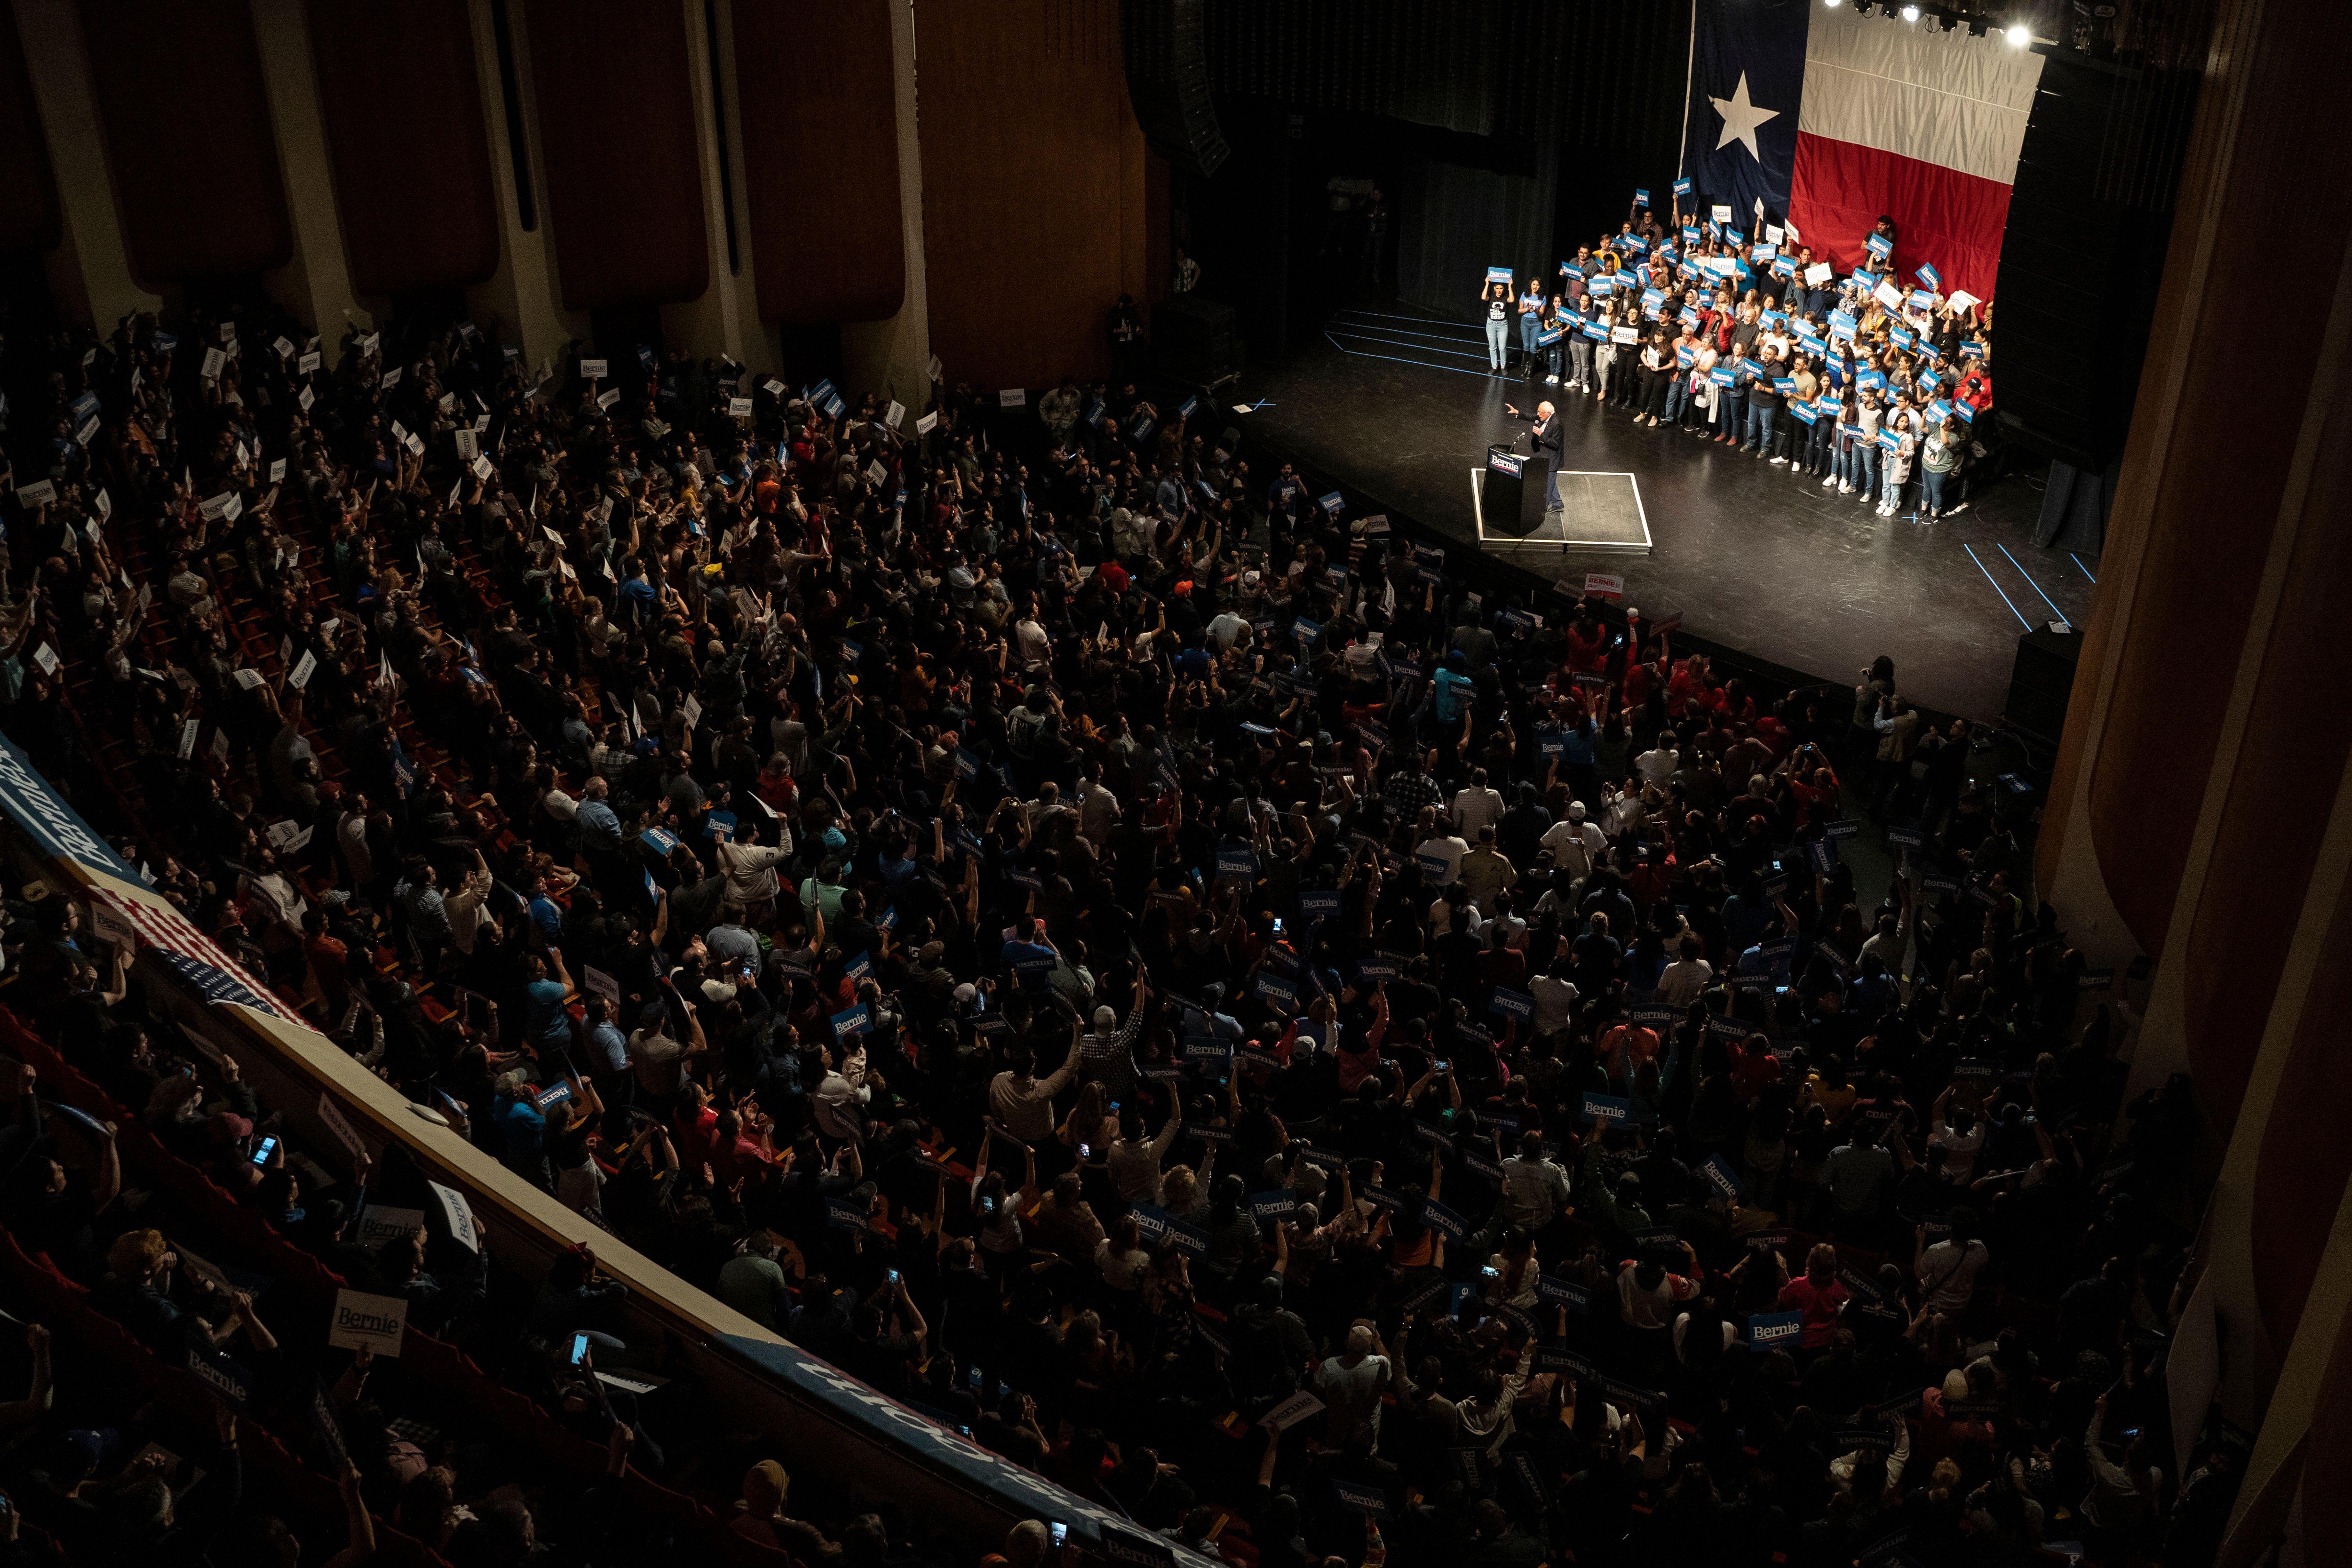 Seen from high up inside a theater, the tiny figure of Bernie Sanders stands on a brightly lit stage with a Texas flag at the back, addressing a full audience. 